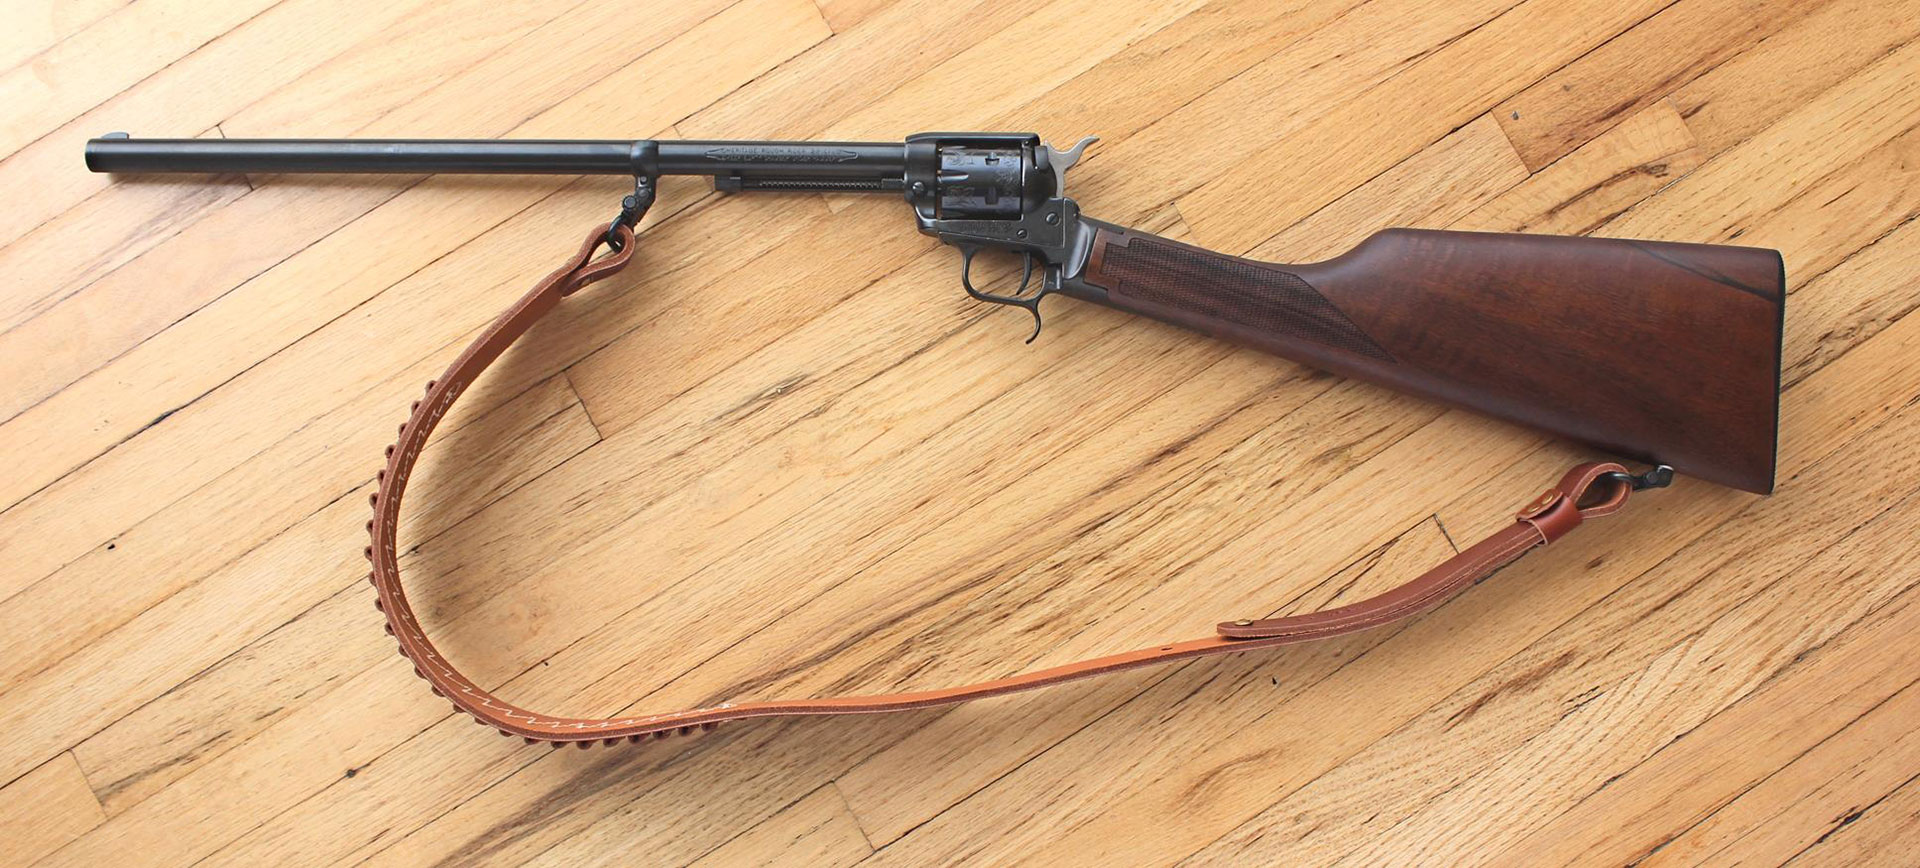 The cost of this revolver-to-carbine project depends on how much you want to spend dressing up the carbine with a shoulder sling or engraved cylinders.